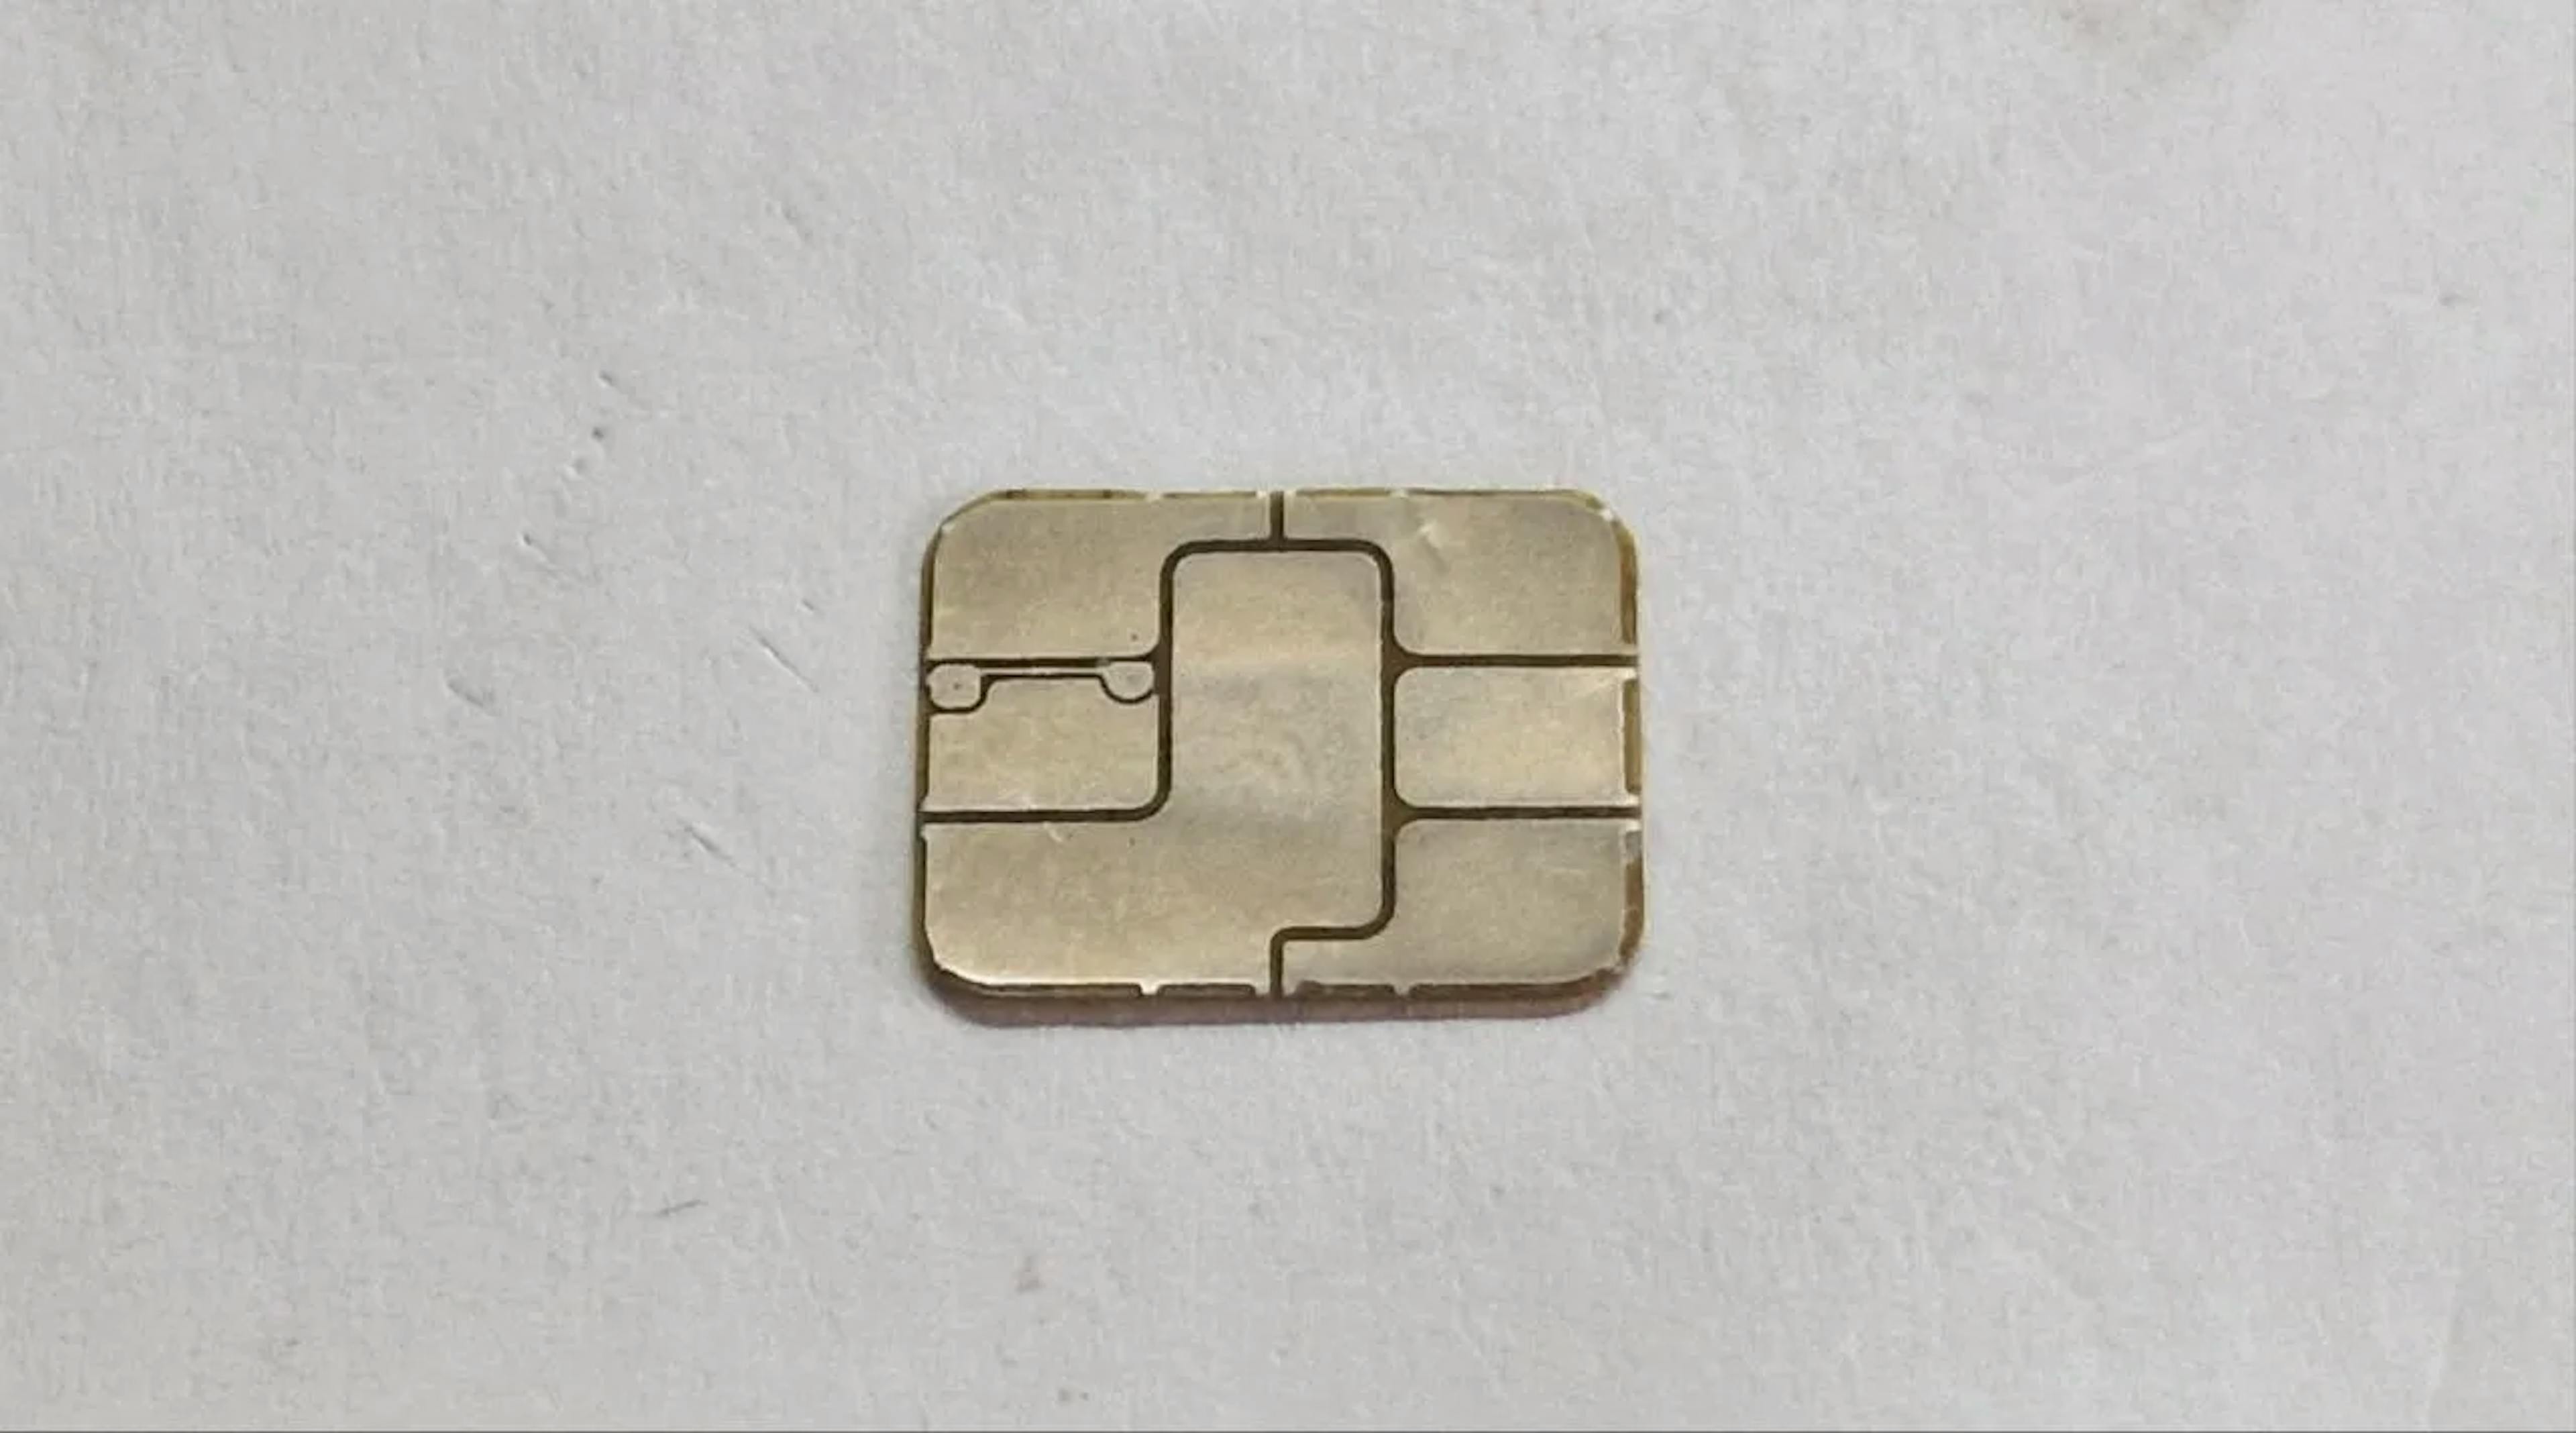 Payment card chip front